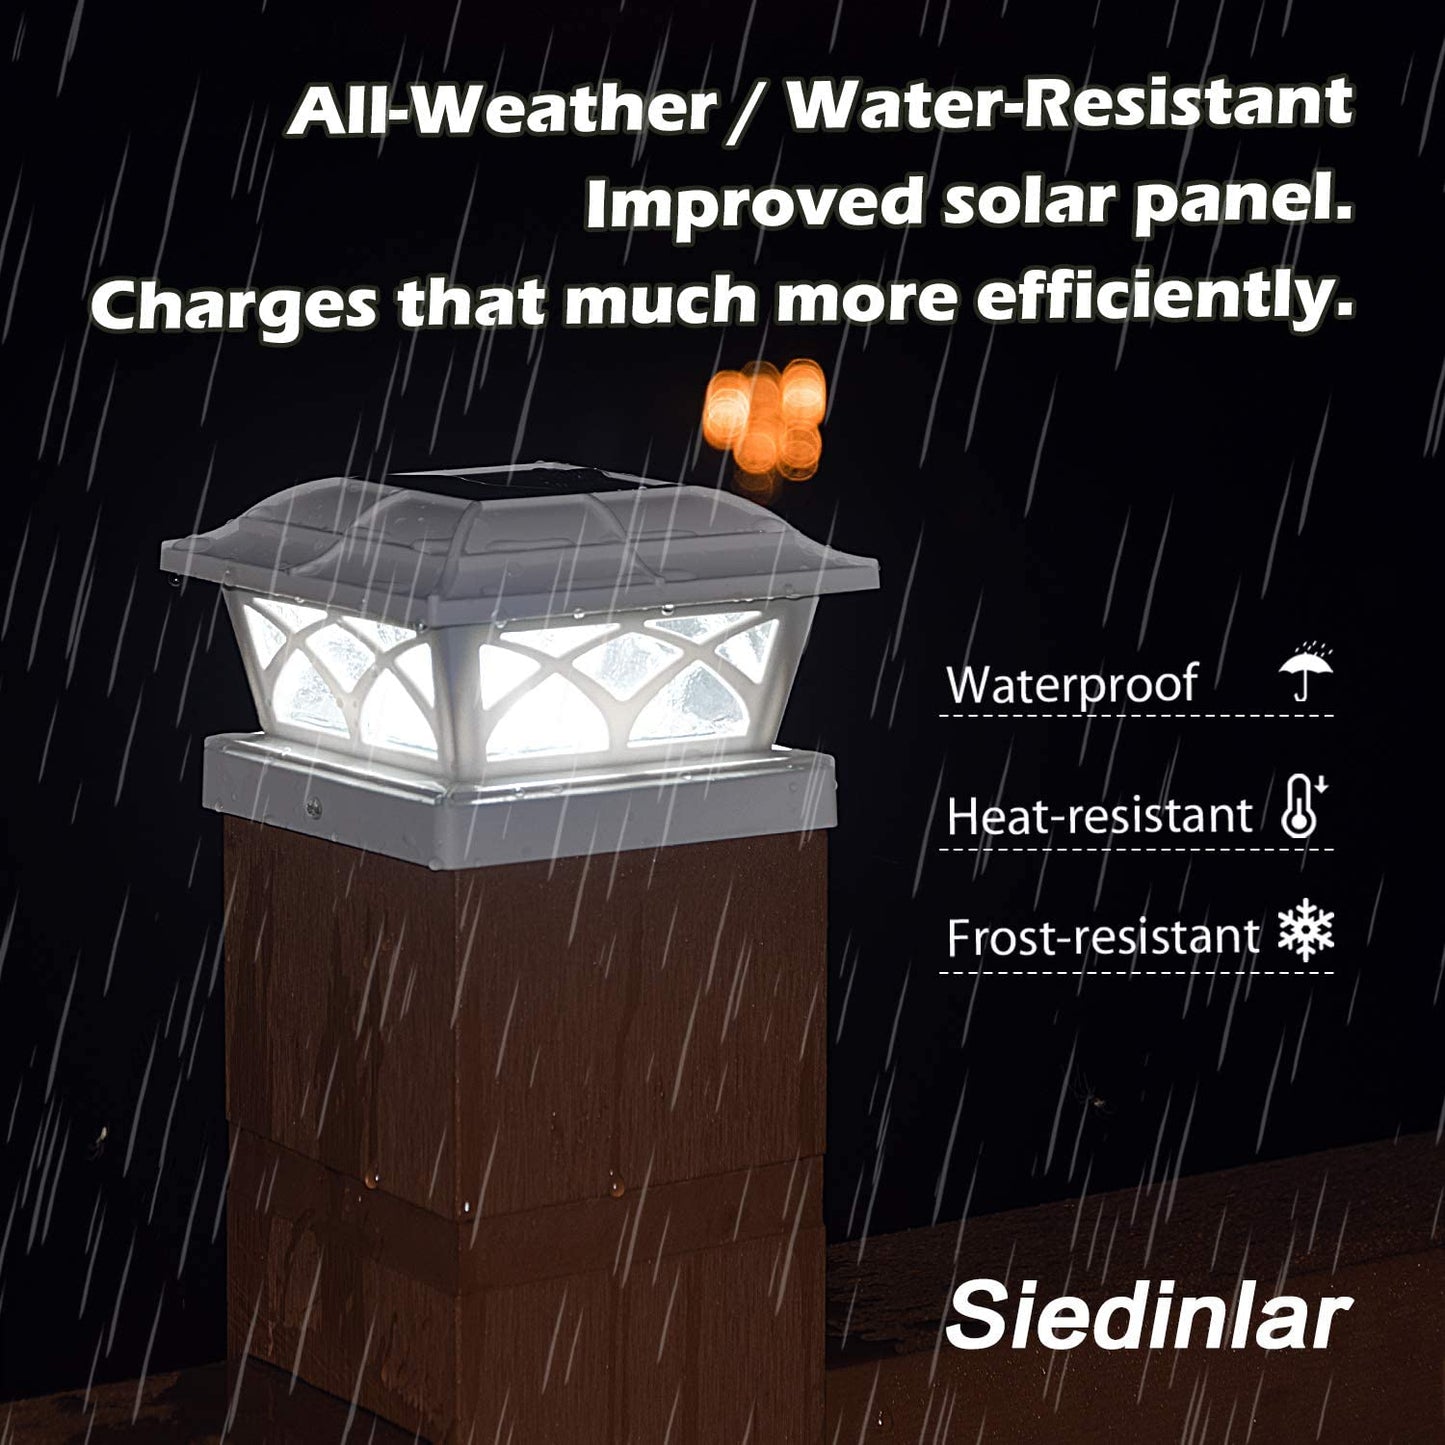 Siedinlar SD012W Solar Post Cap Lights Outdoor Glass 2 Modes 8 LEDs for 4x4 5x5 6x6 Wooden Posts Fence Deck Patio Decoration Warm White/Cool White Lighting White (2 Pack)